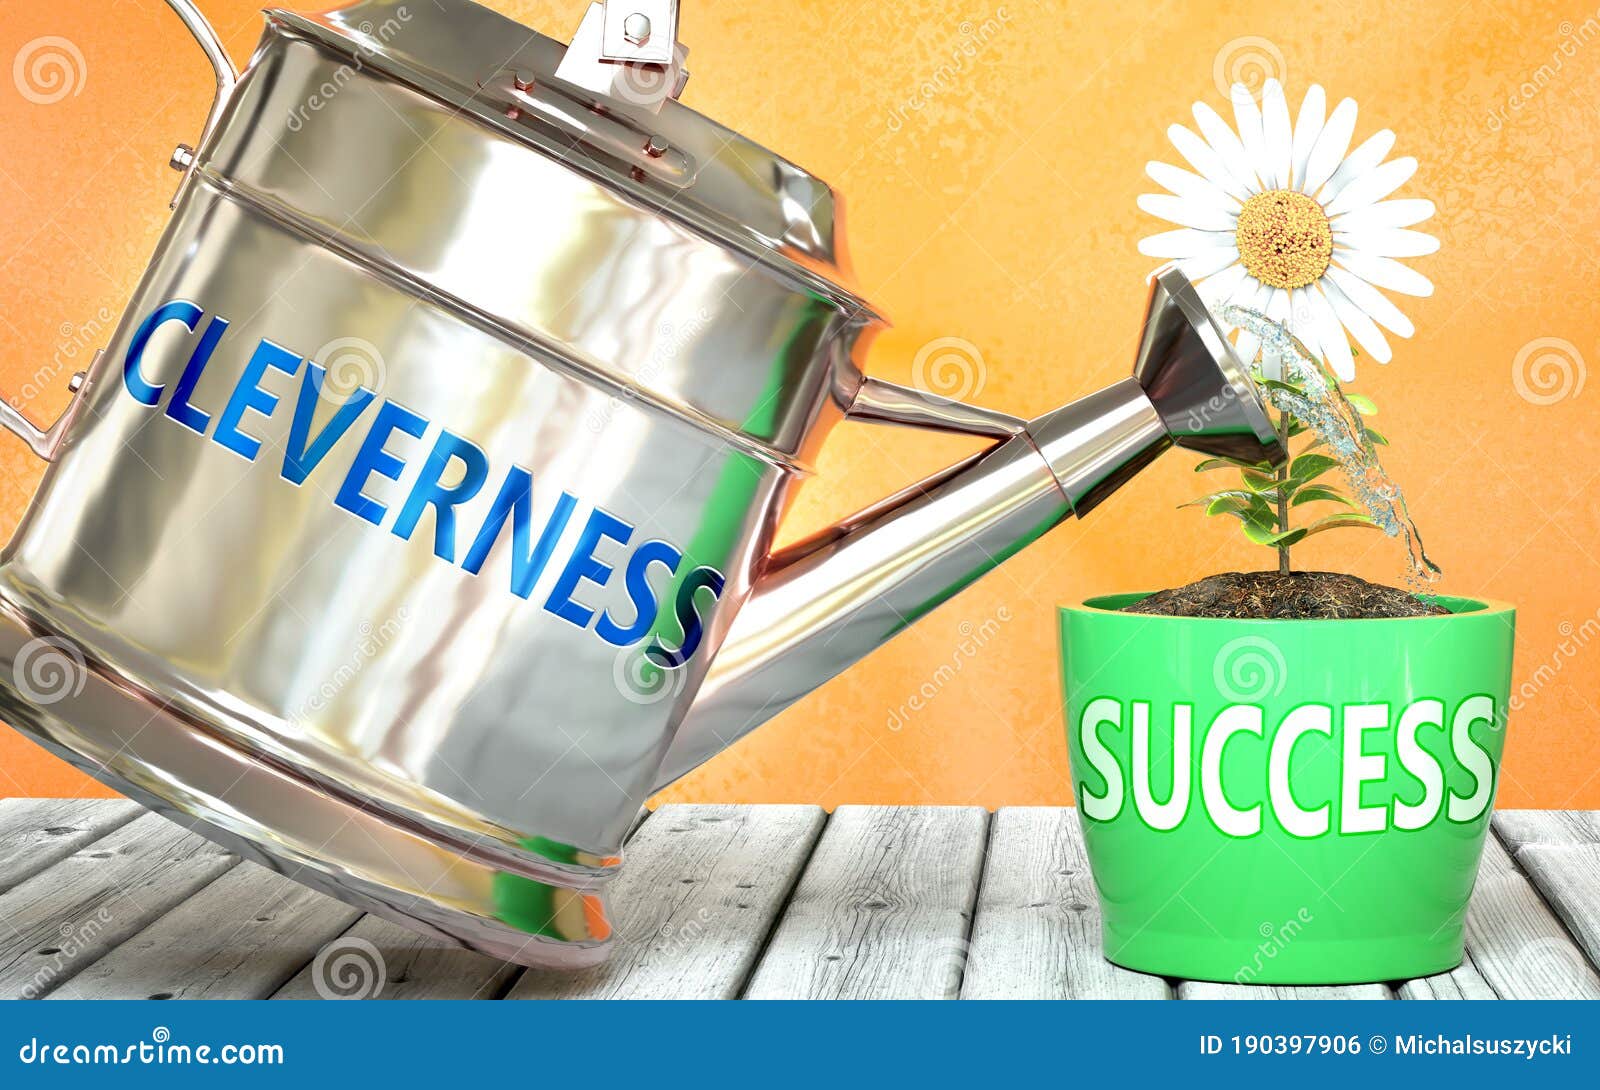 cleverness helps achieving success - pictured as word cleverness on a watering can to ize that cleverness makes success grow